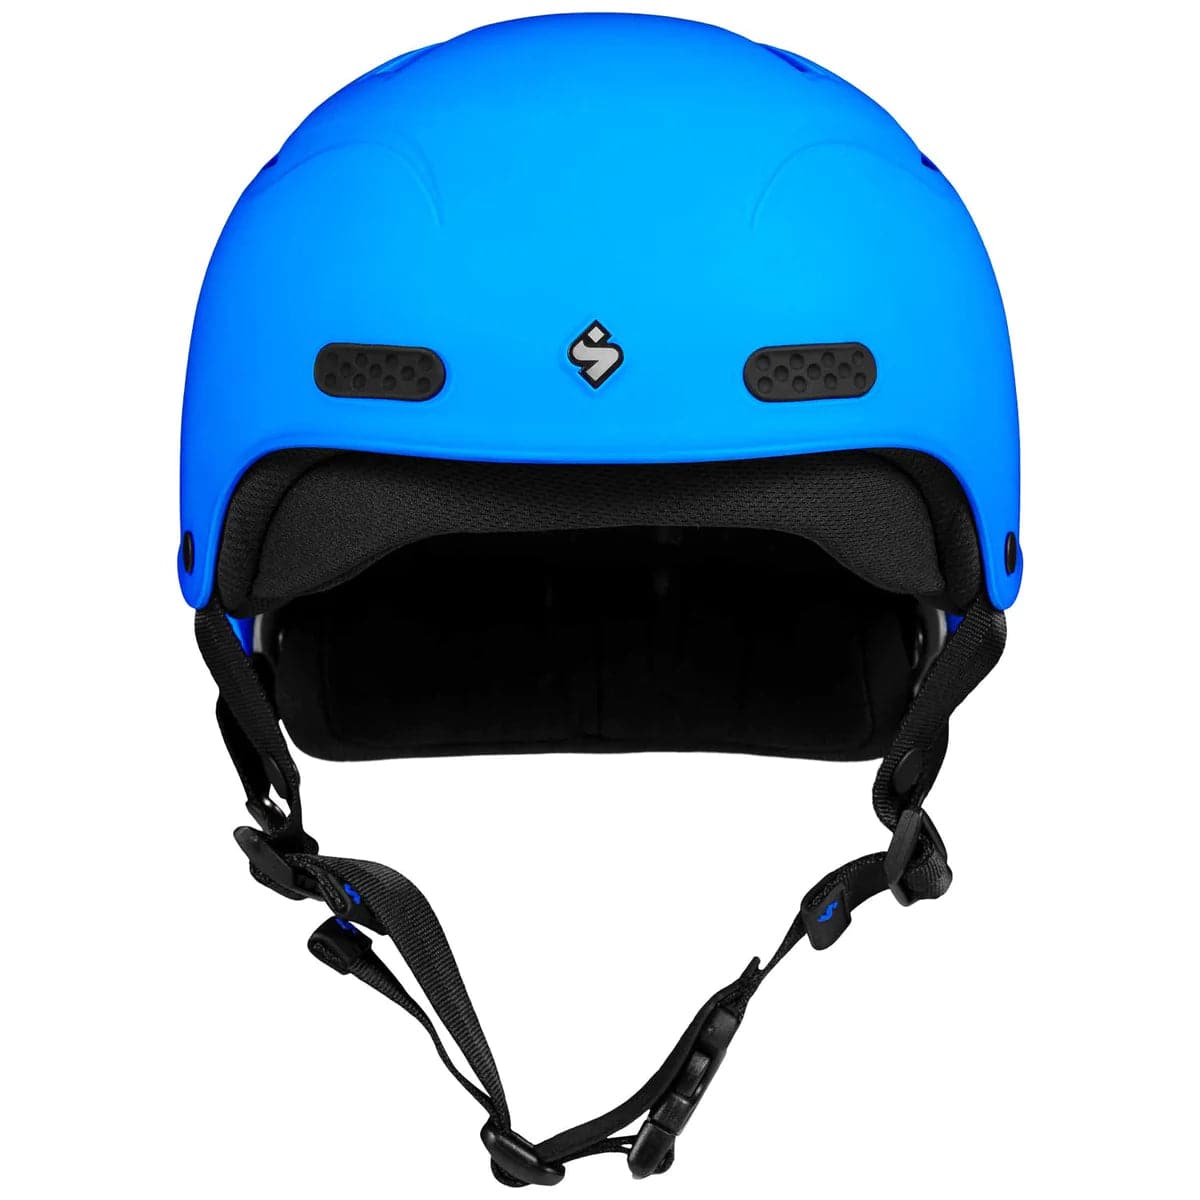 Featuring the Wanderer II Helmet helmet manufactured by Sweet shown here from a seventh angle.